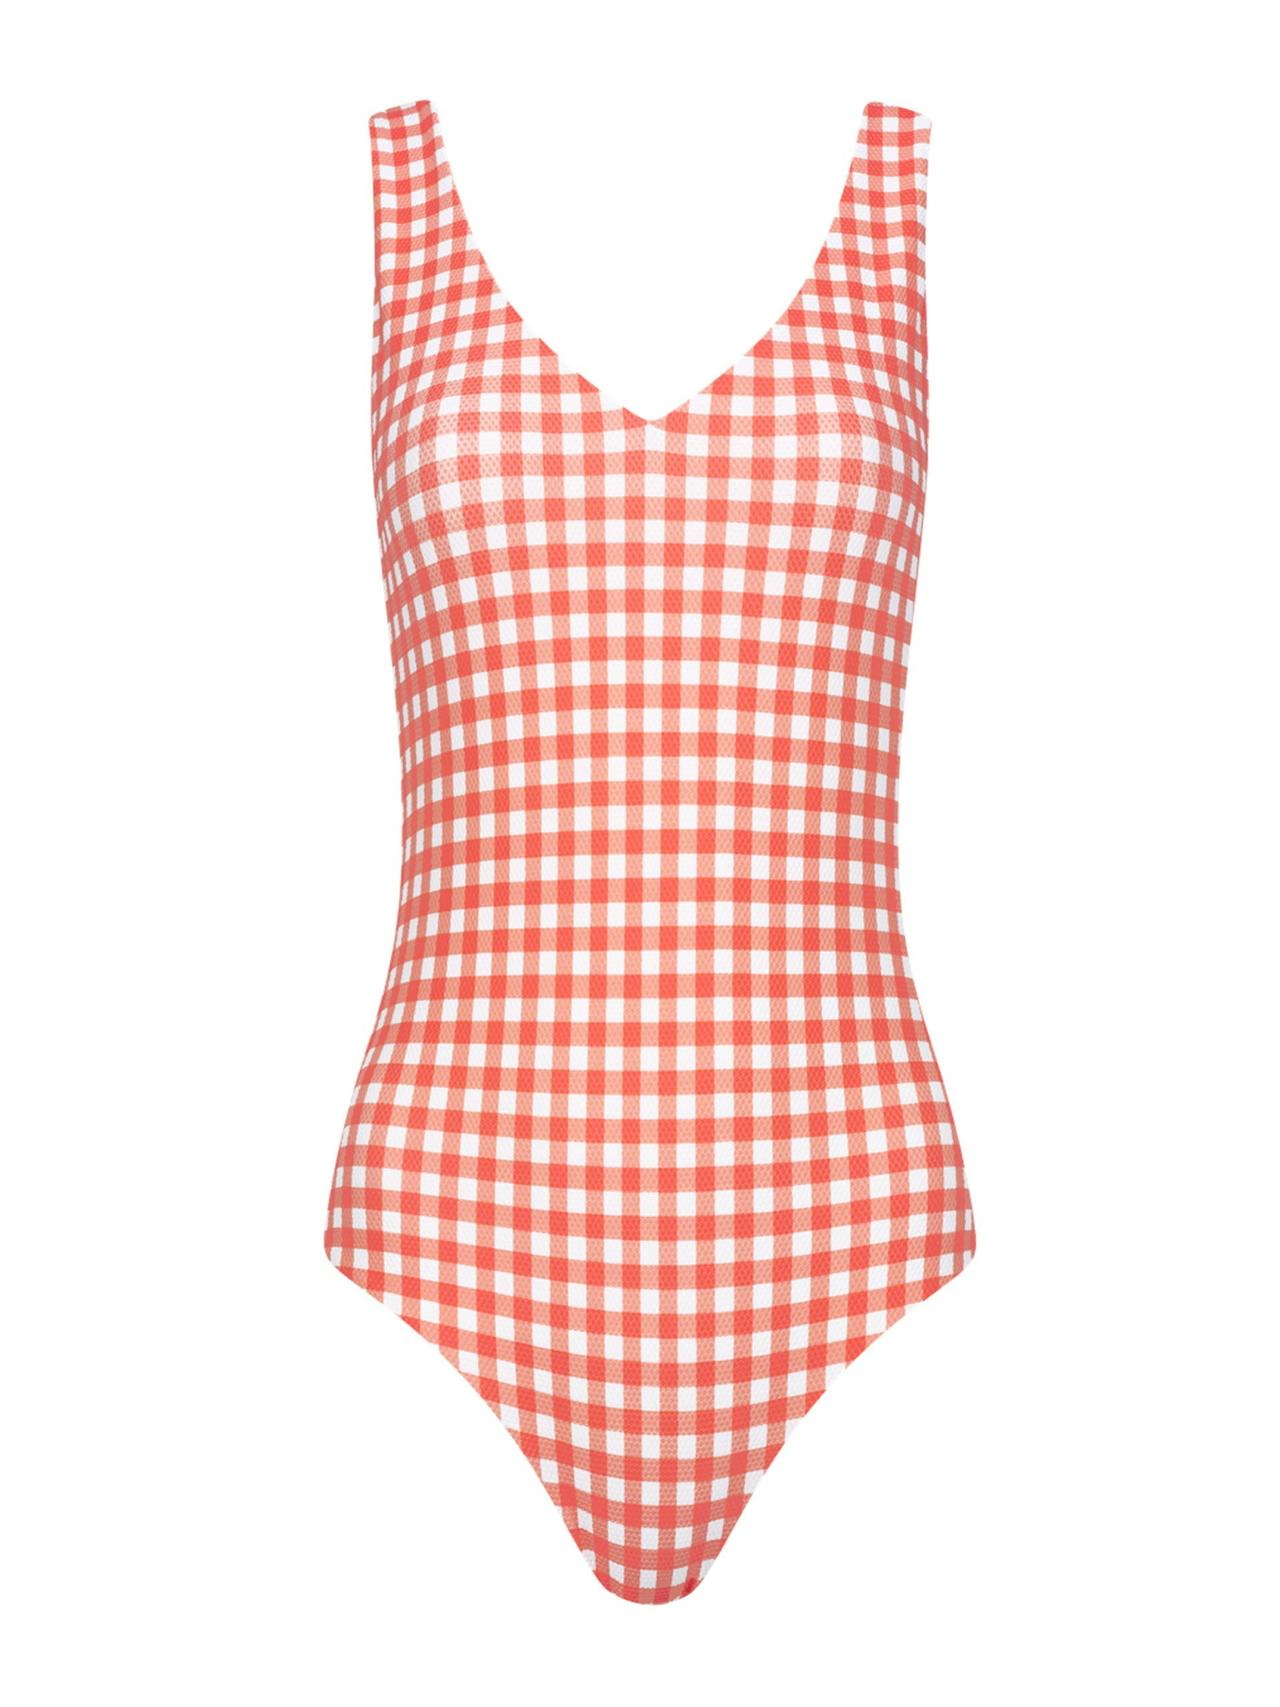 The Milly swimsuit in coral gingham